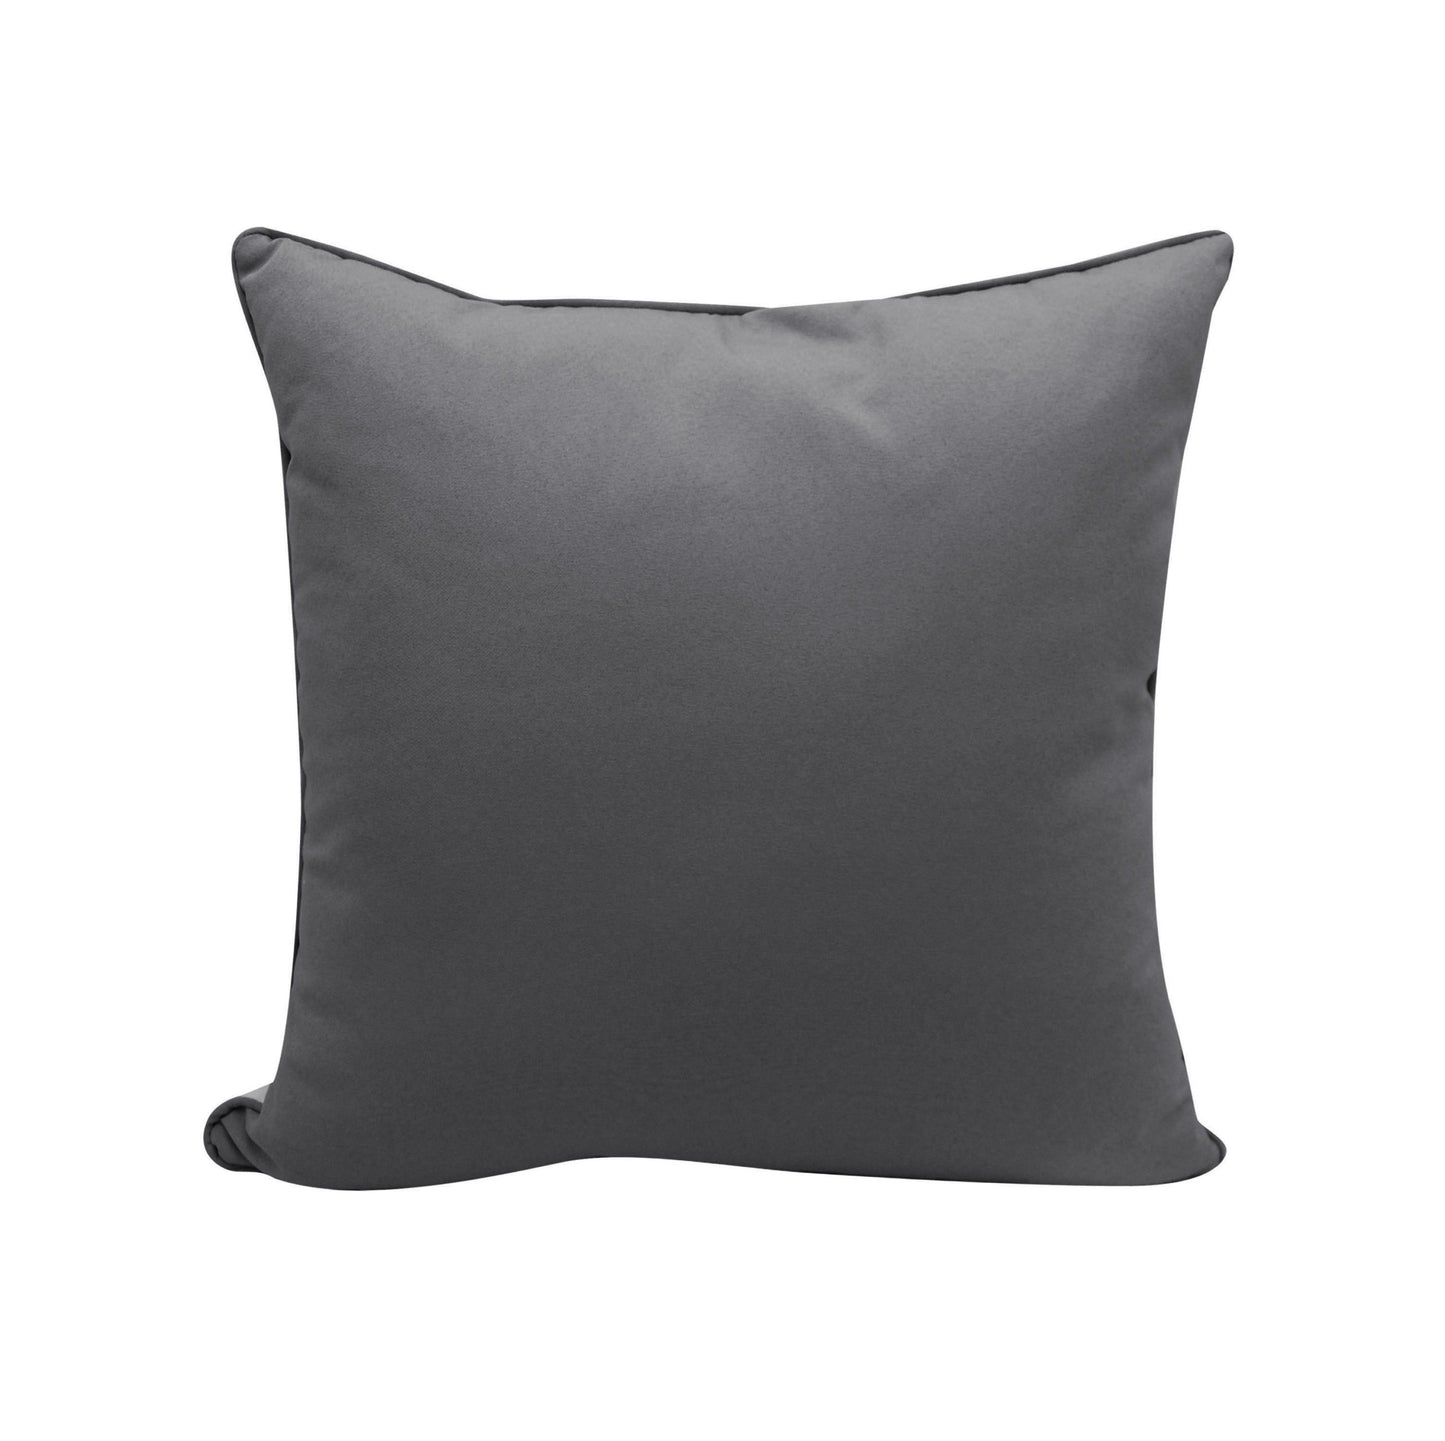 Solid grey fabric; back of the Head Strong Right Indoor Outdoor Pillow.